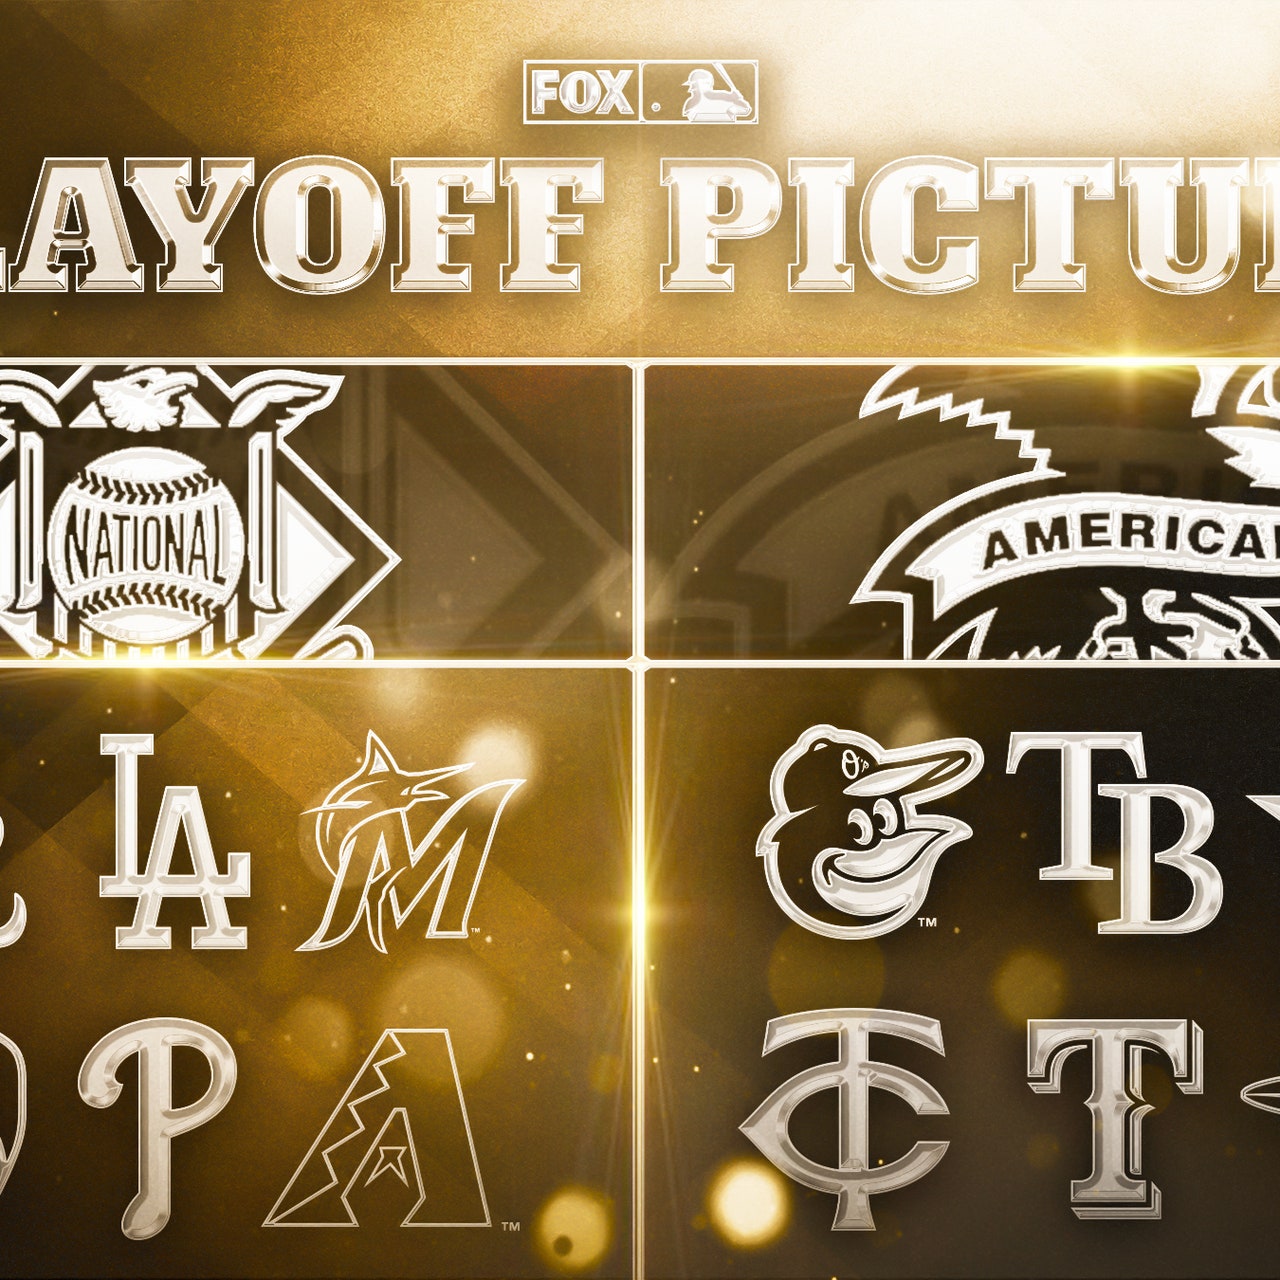 MLB playoff bracket 2022: Full schedule, TV channels, scores for